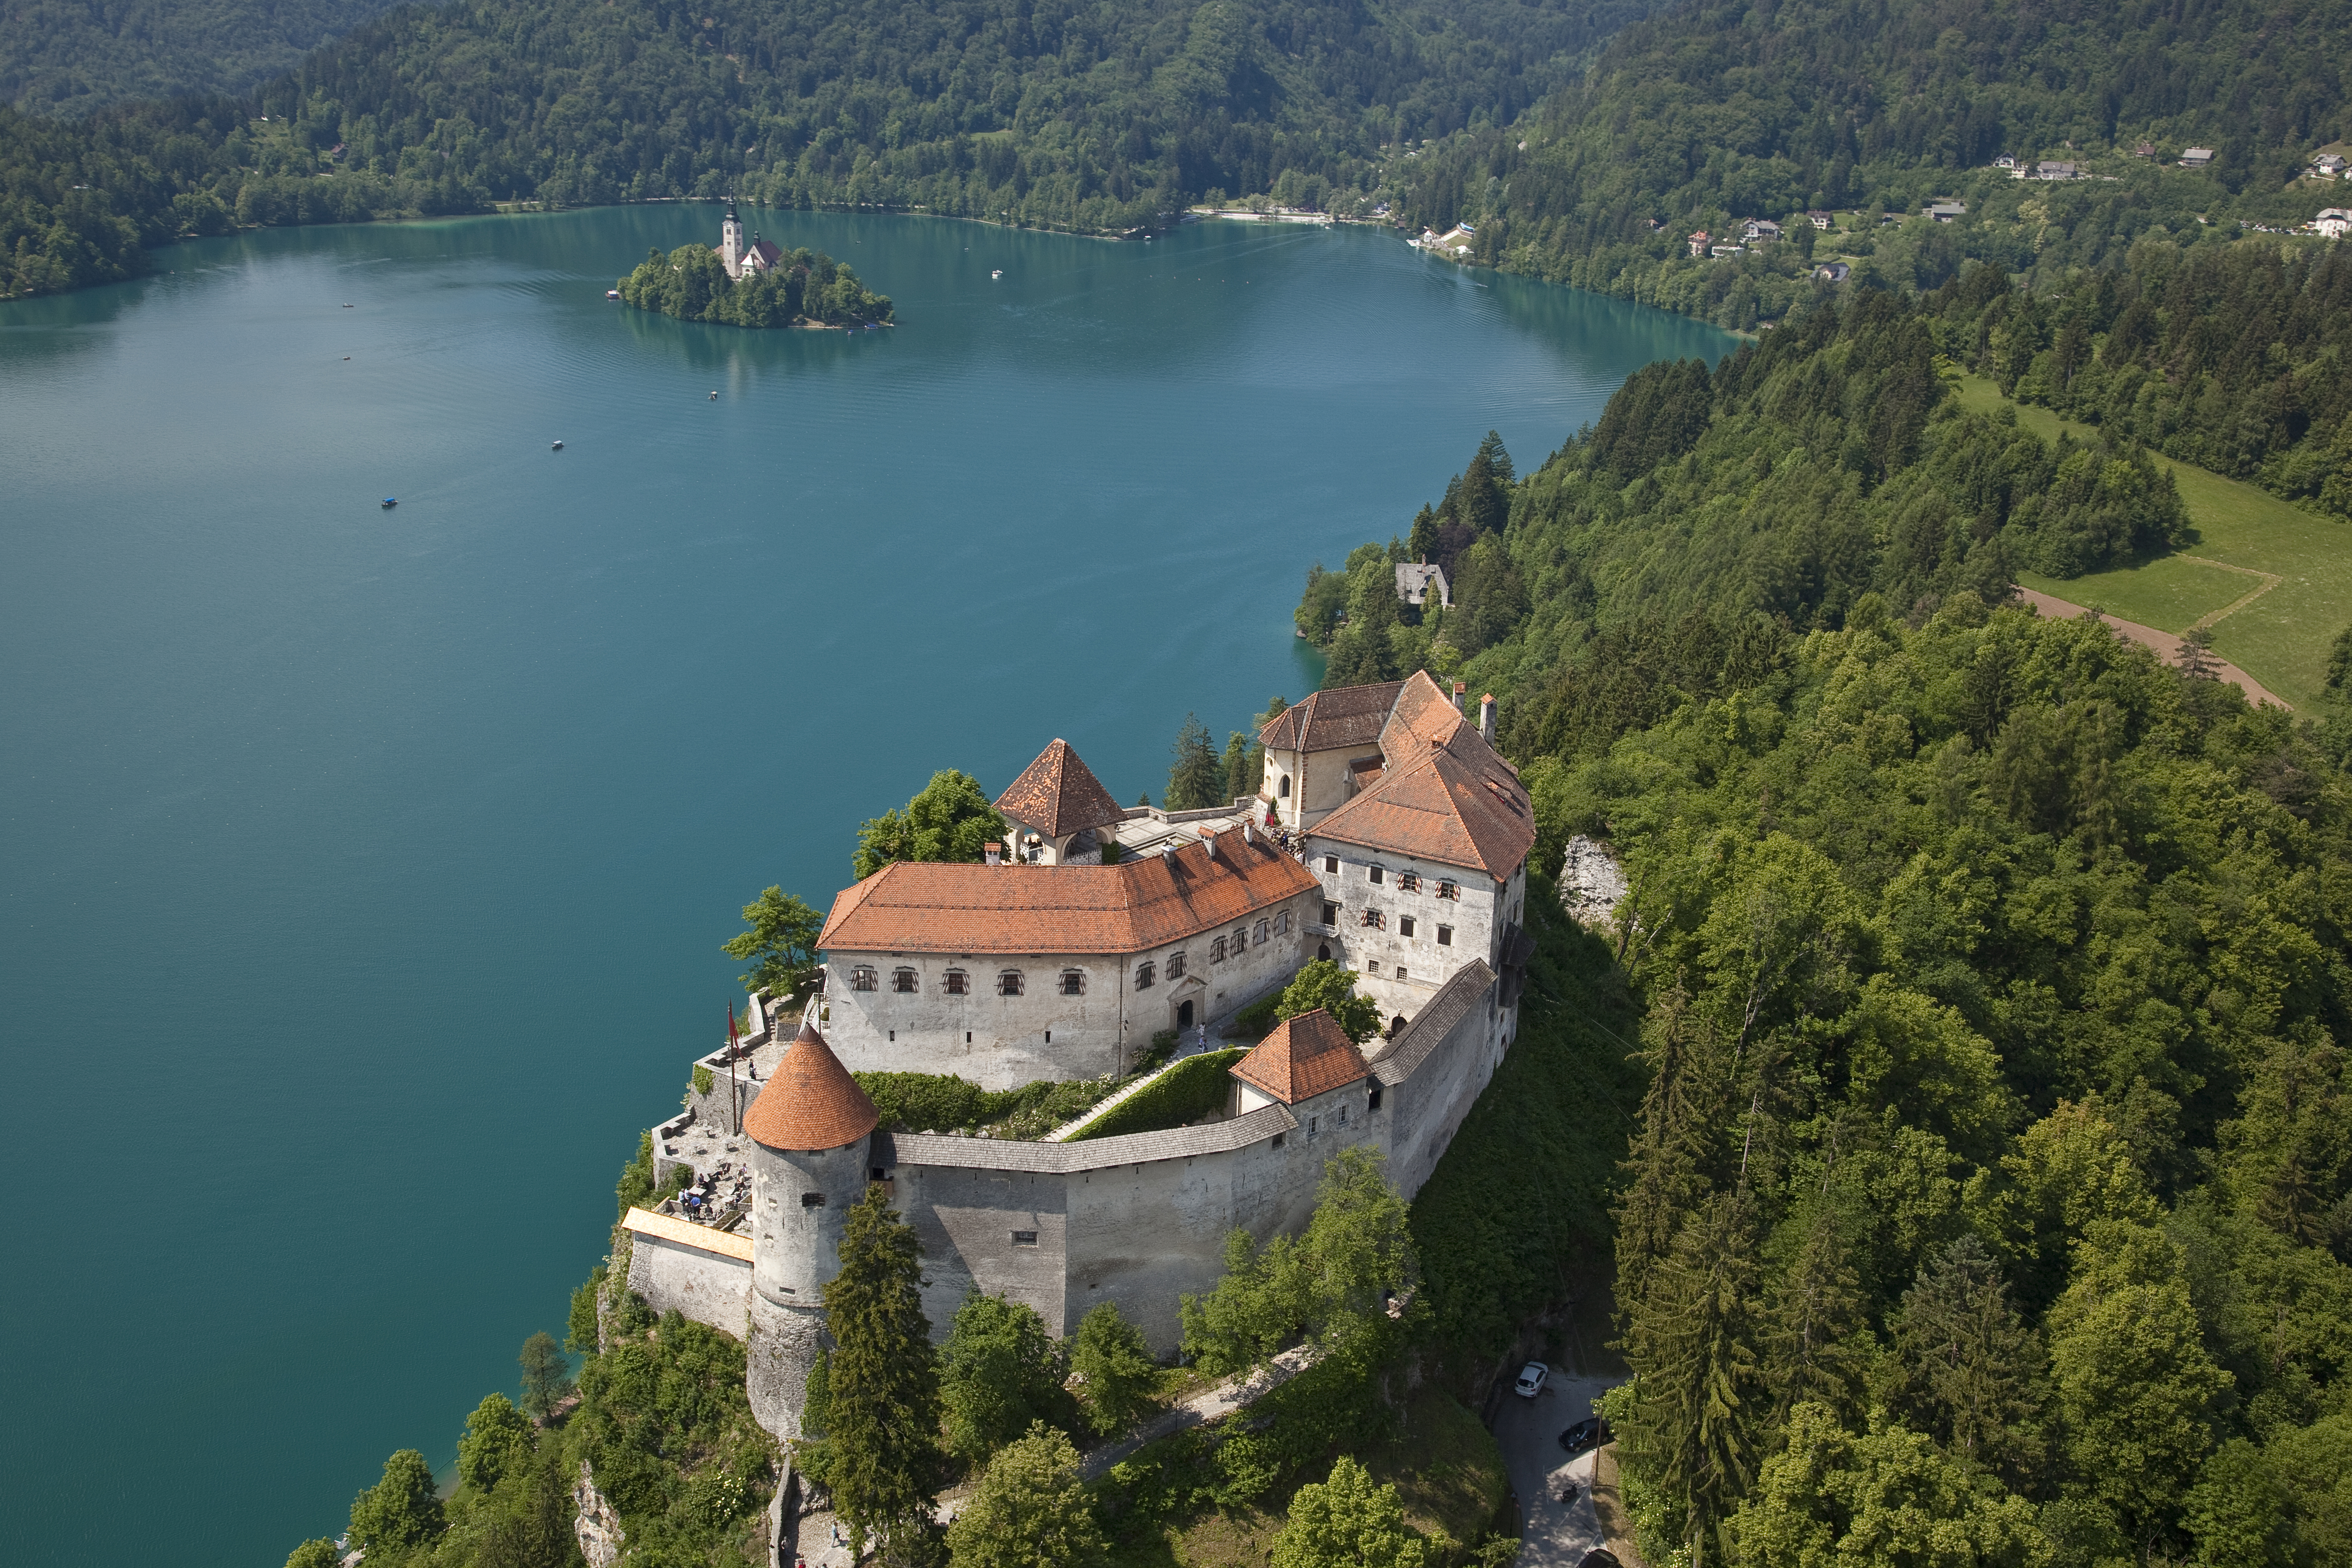 The Rikli walk to Bled Castle